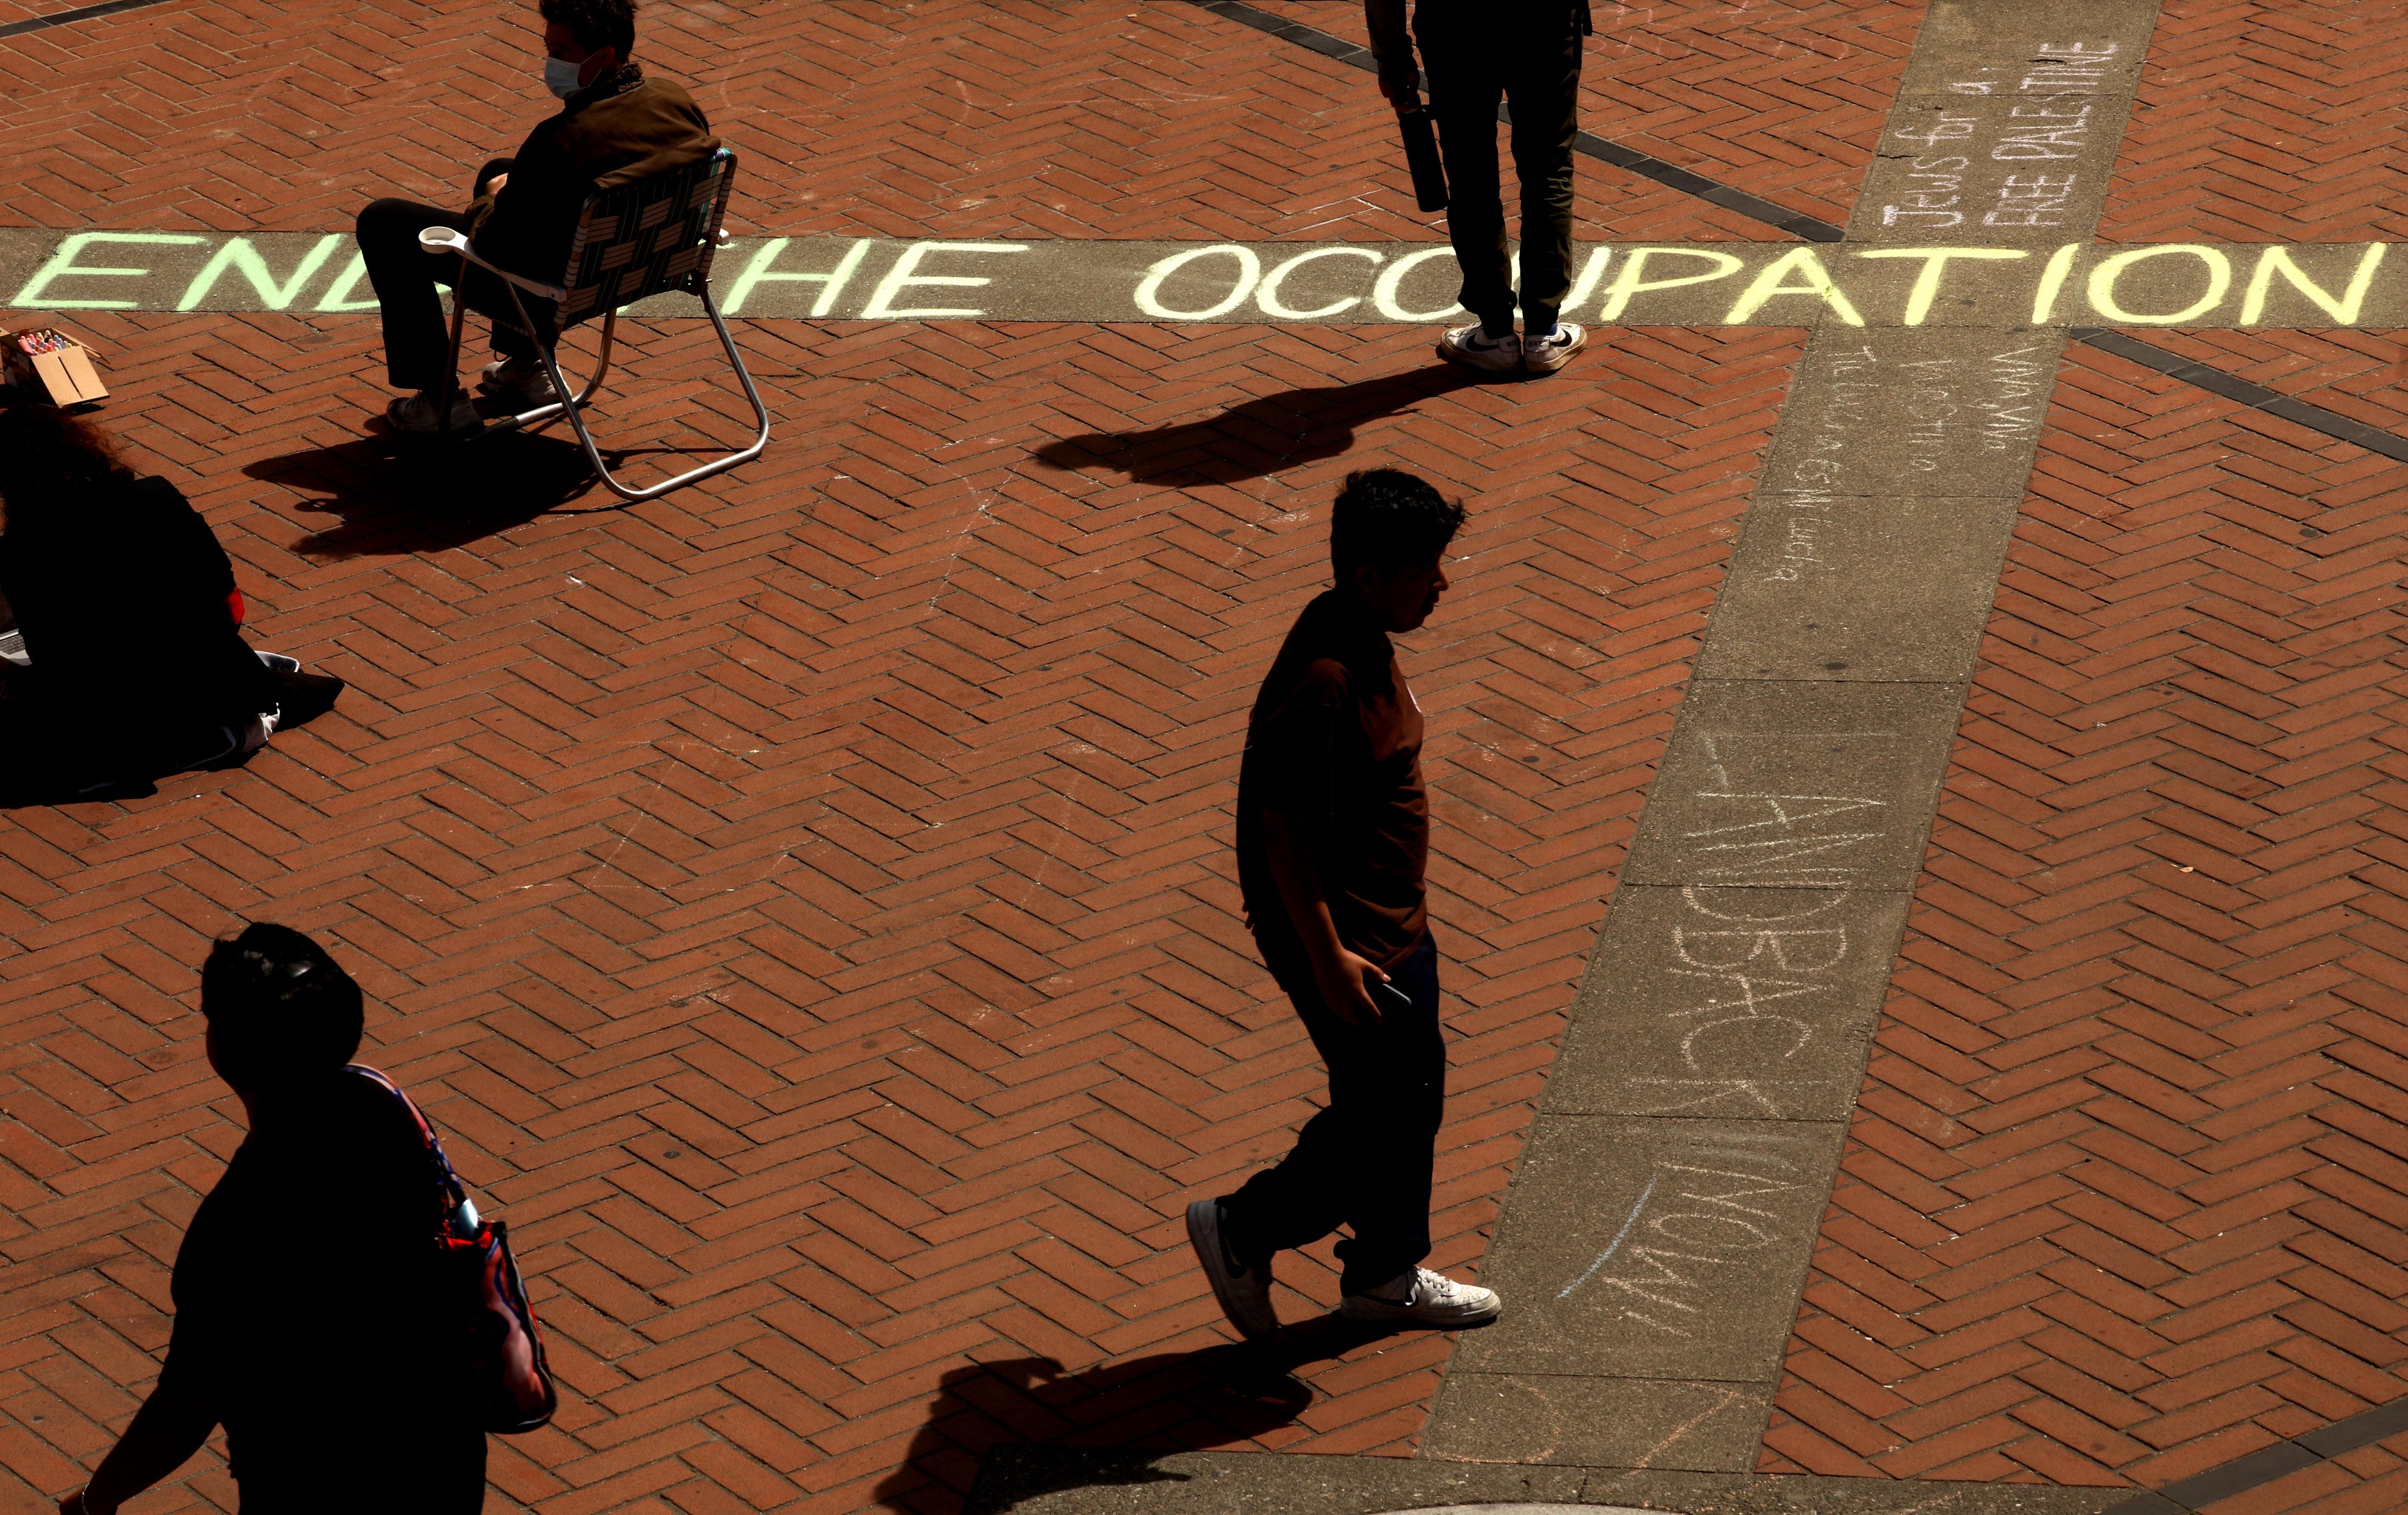 People walk over brick pavement with the phrase &quot;END THE OCCUPATION&quot; chalked in large letters. Shadows suggest bright sunlight.